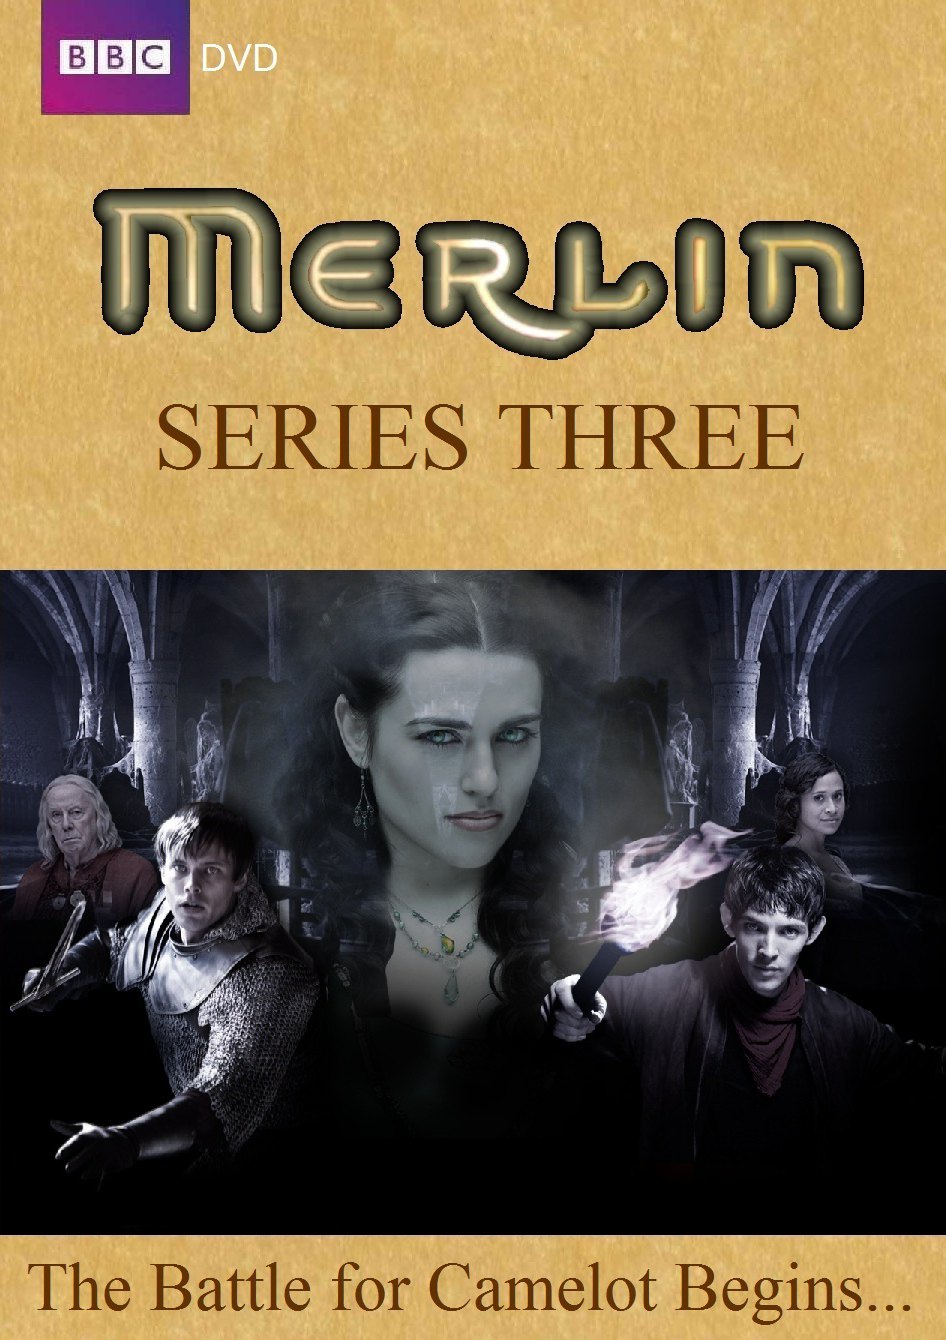 Adam Taylor-Creek's DVD cover for Merlin - Series 3